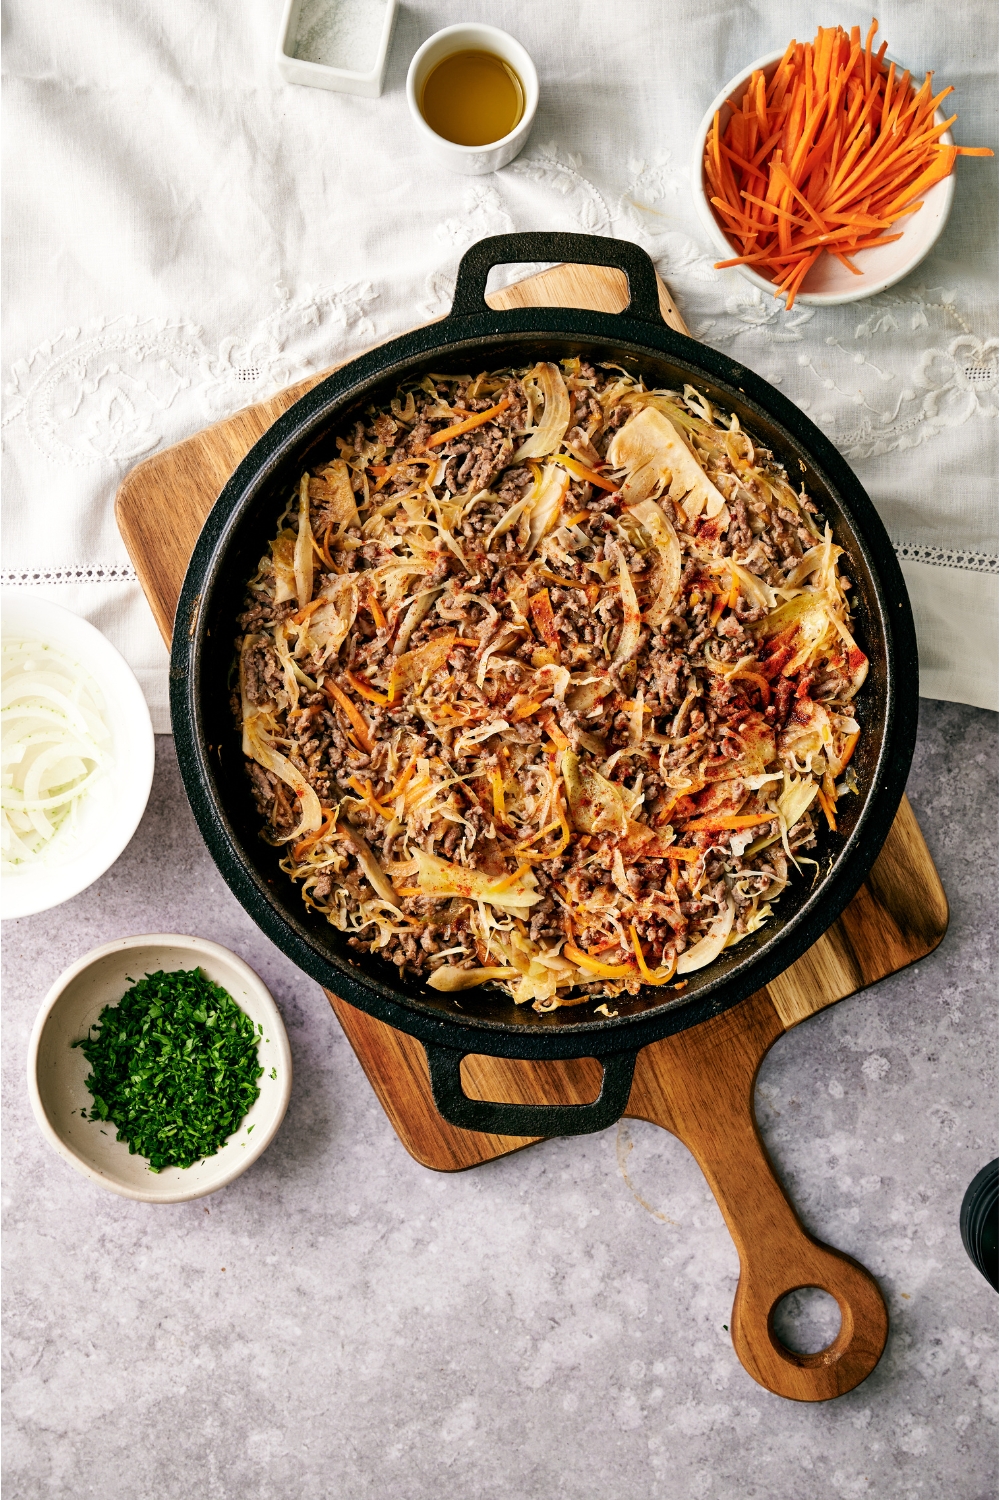 A black skillet filled with ground beef and cabbage stir fry. The skillet is on a wooden board next to bowls of parsley and sliced carrots.